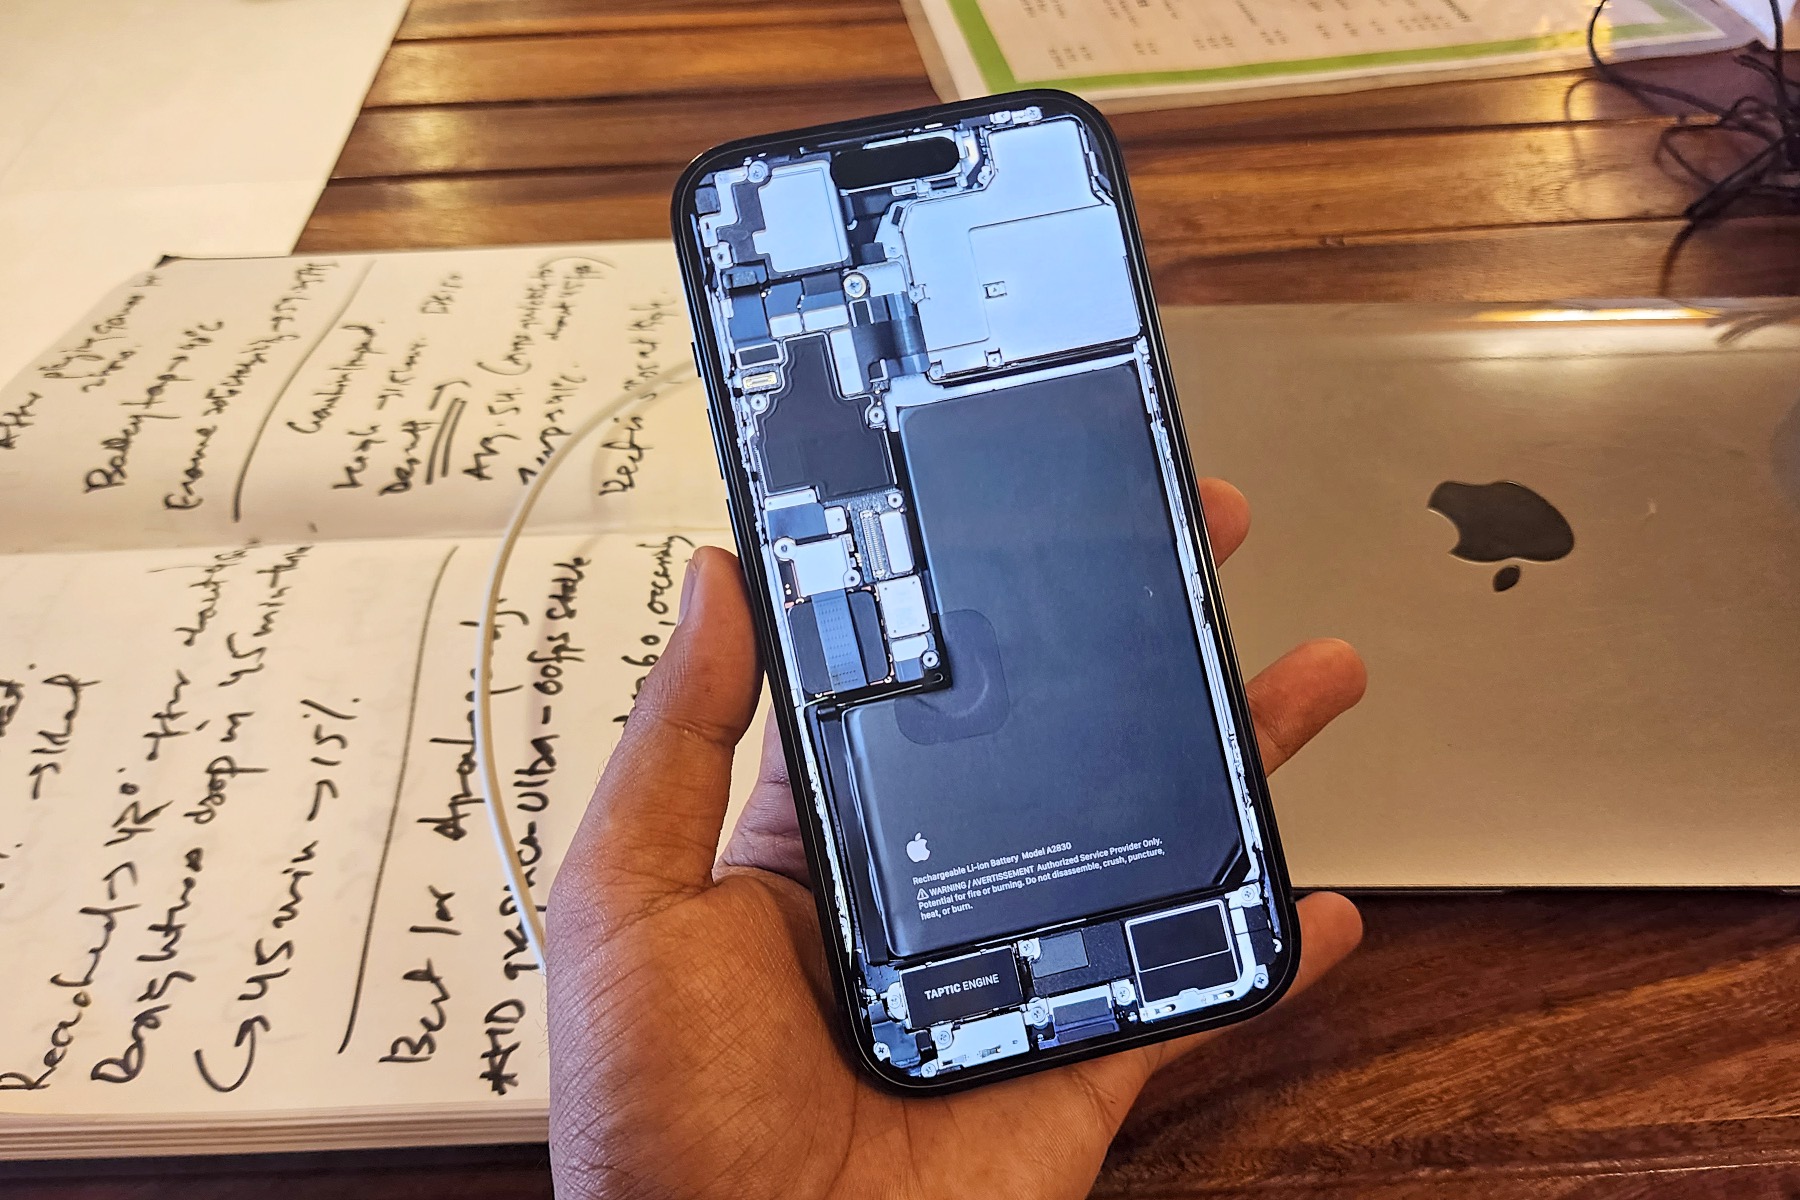 Internal design of the iPhone 14 Pro